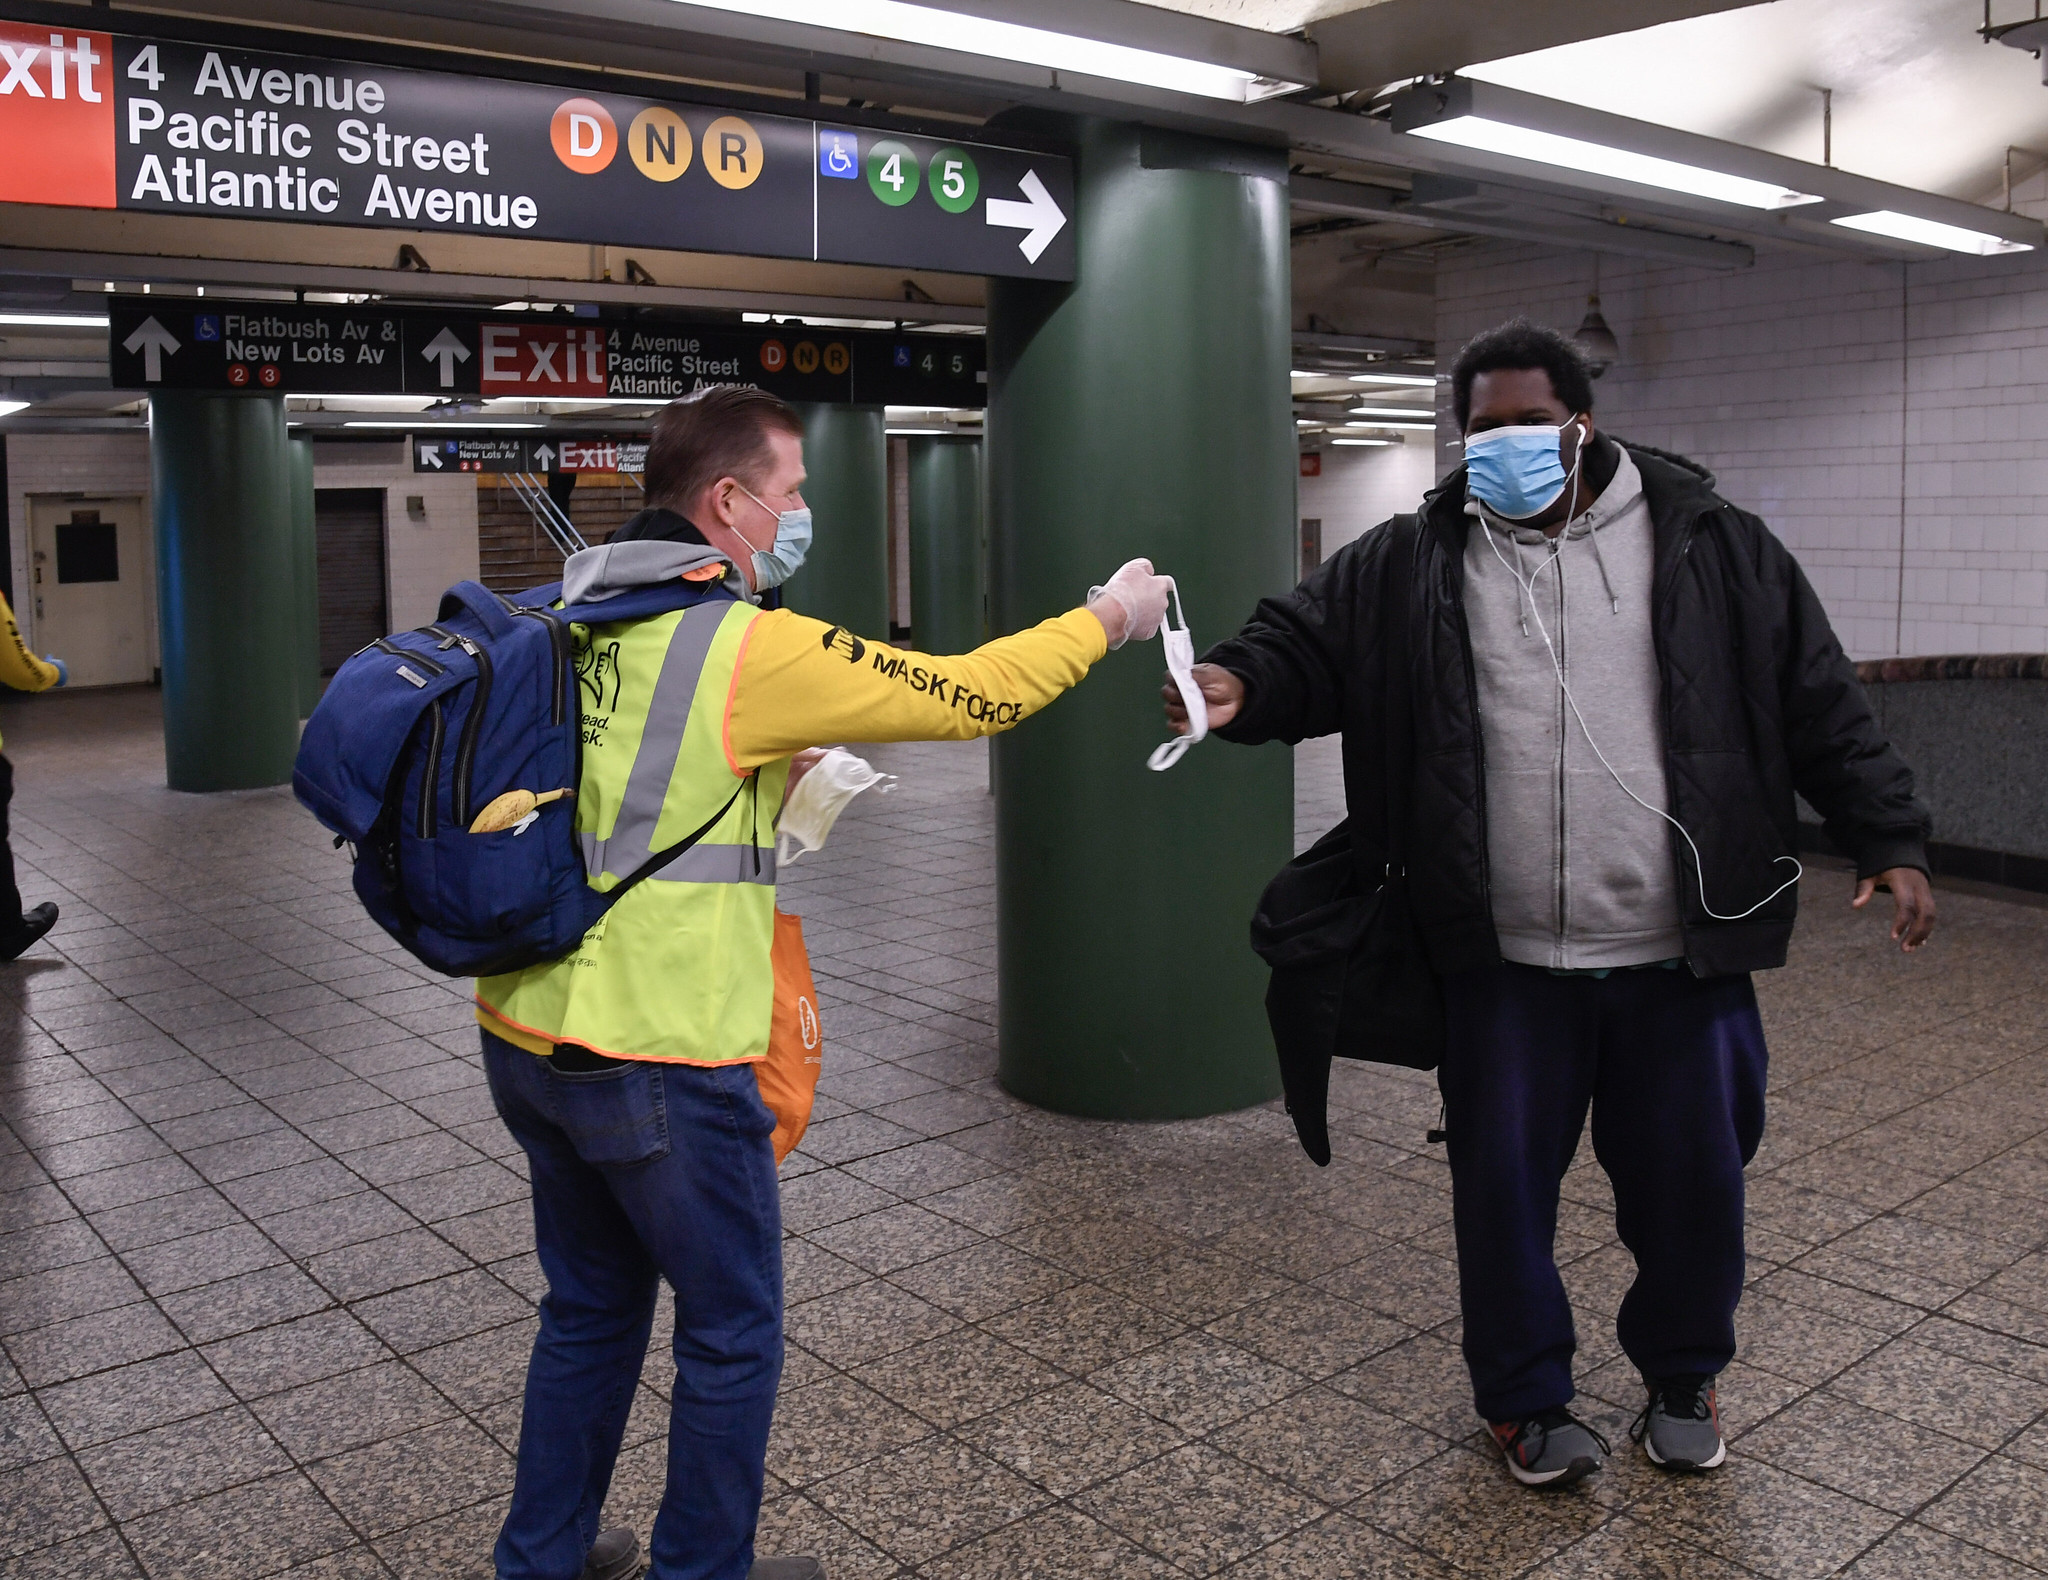 MTA Mask Force Hands Out More Masks Across City as TV News Personalities Make Announcements in the Subway